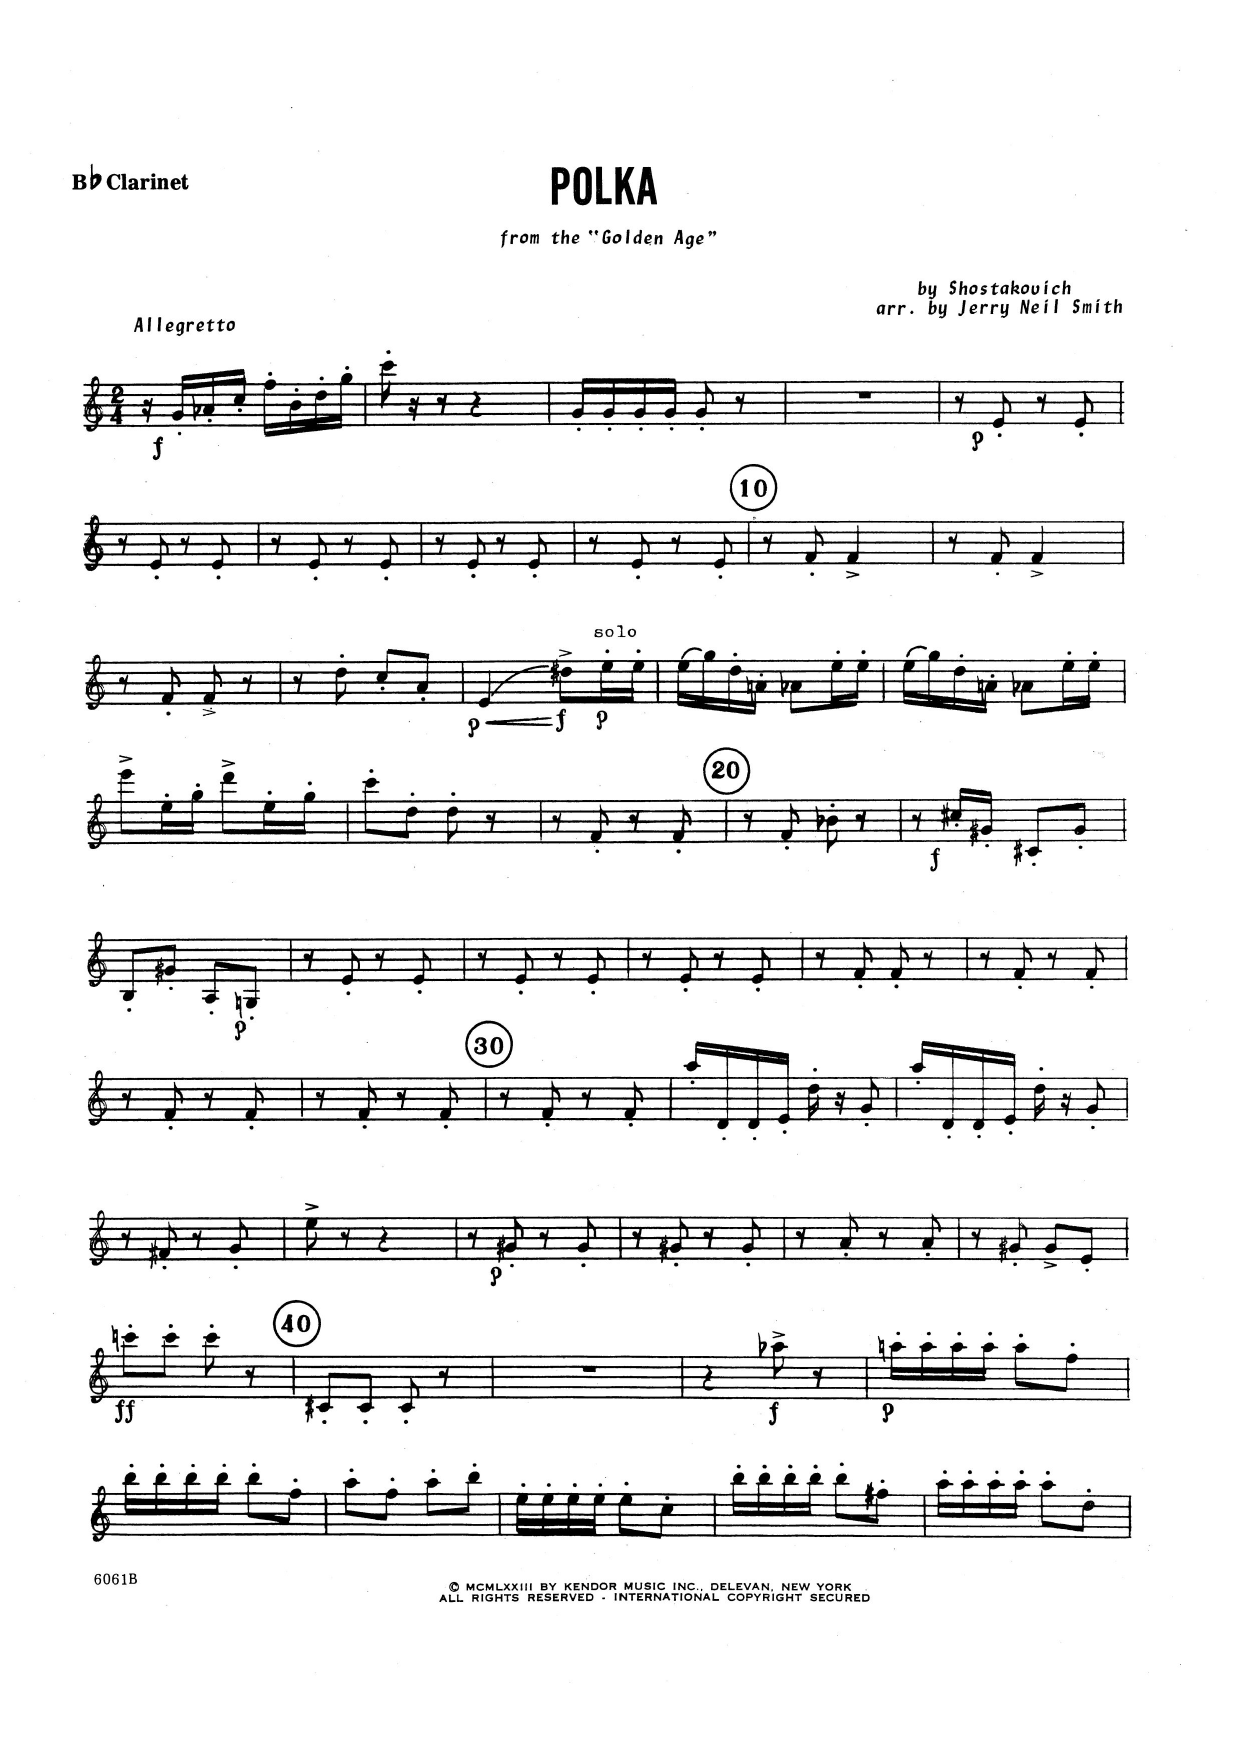 Download Jerry Smith Polka - Bb Clarinet Sheet Music